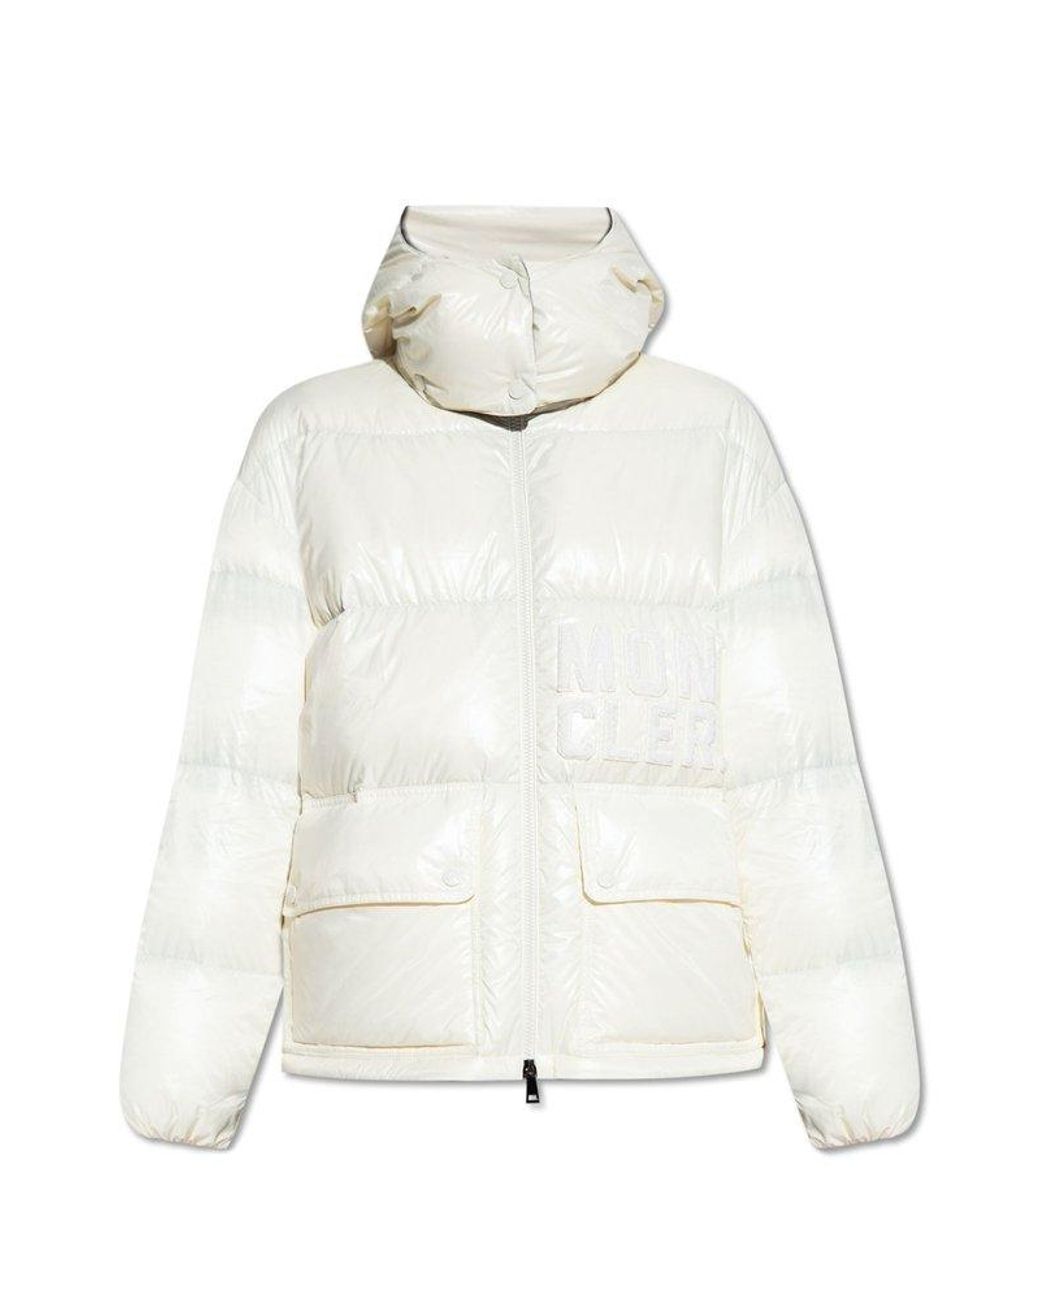 Moncler Abbaye Hooded Jacket in White | Lyst